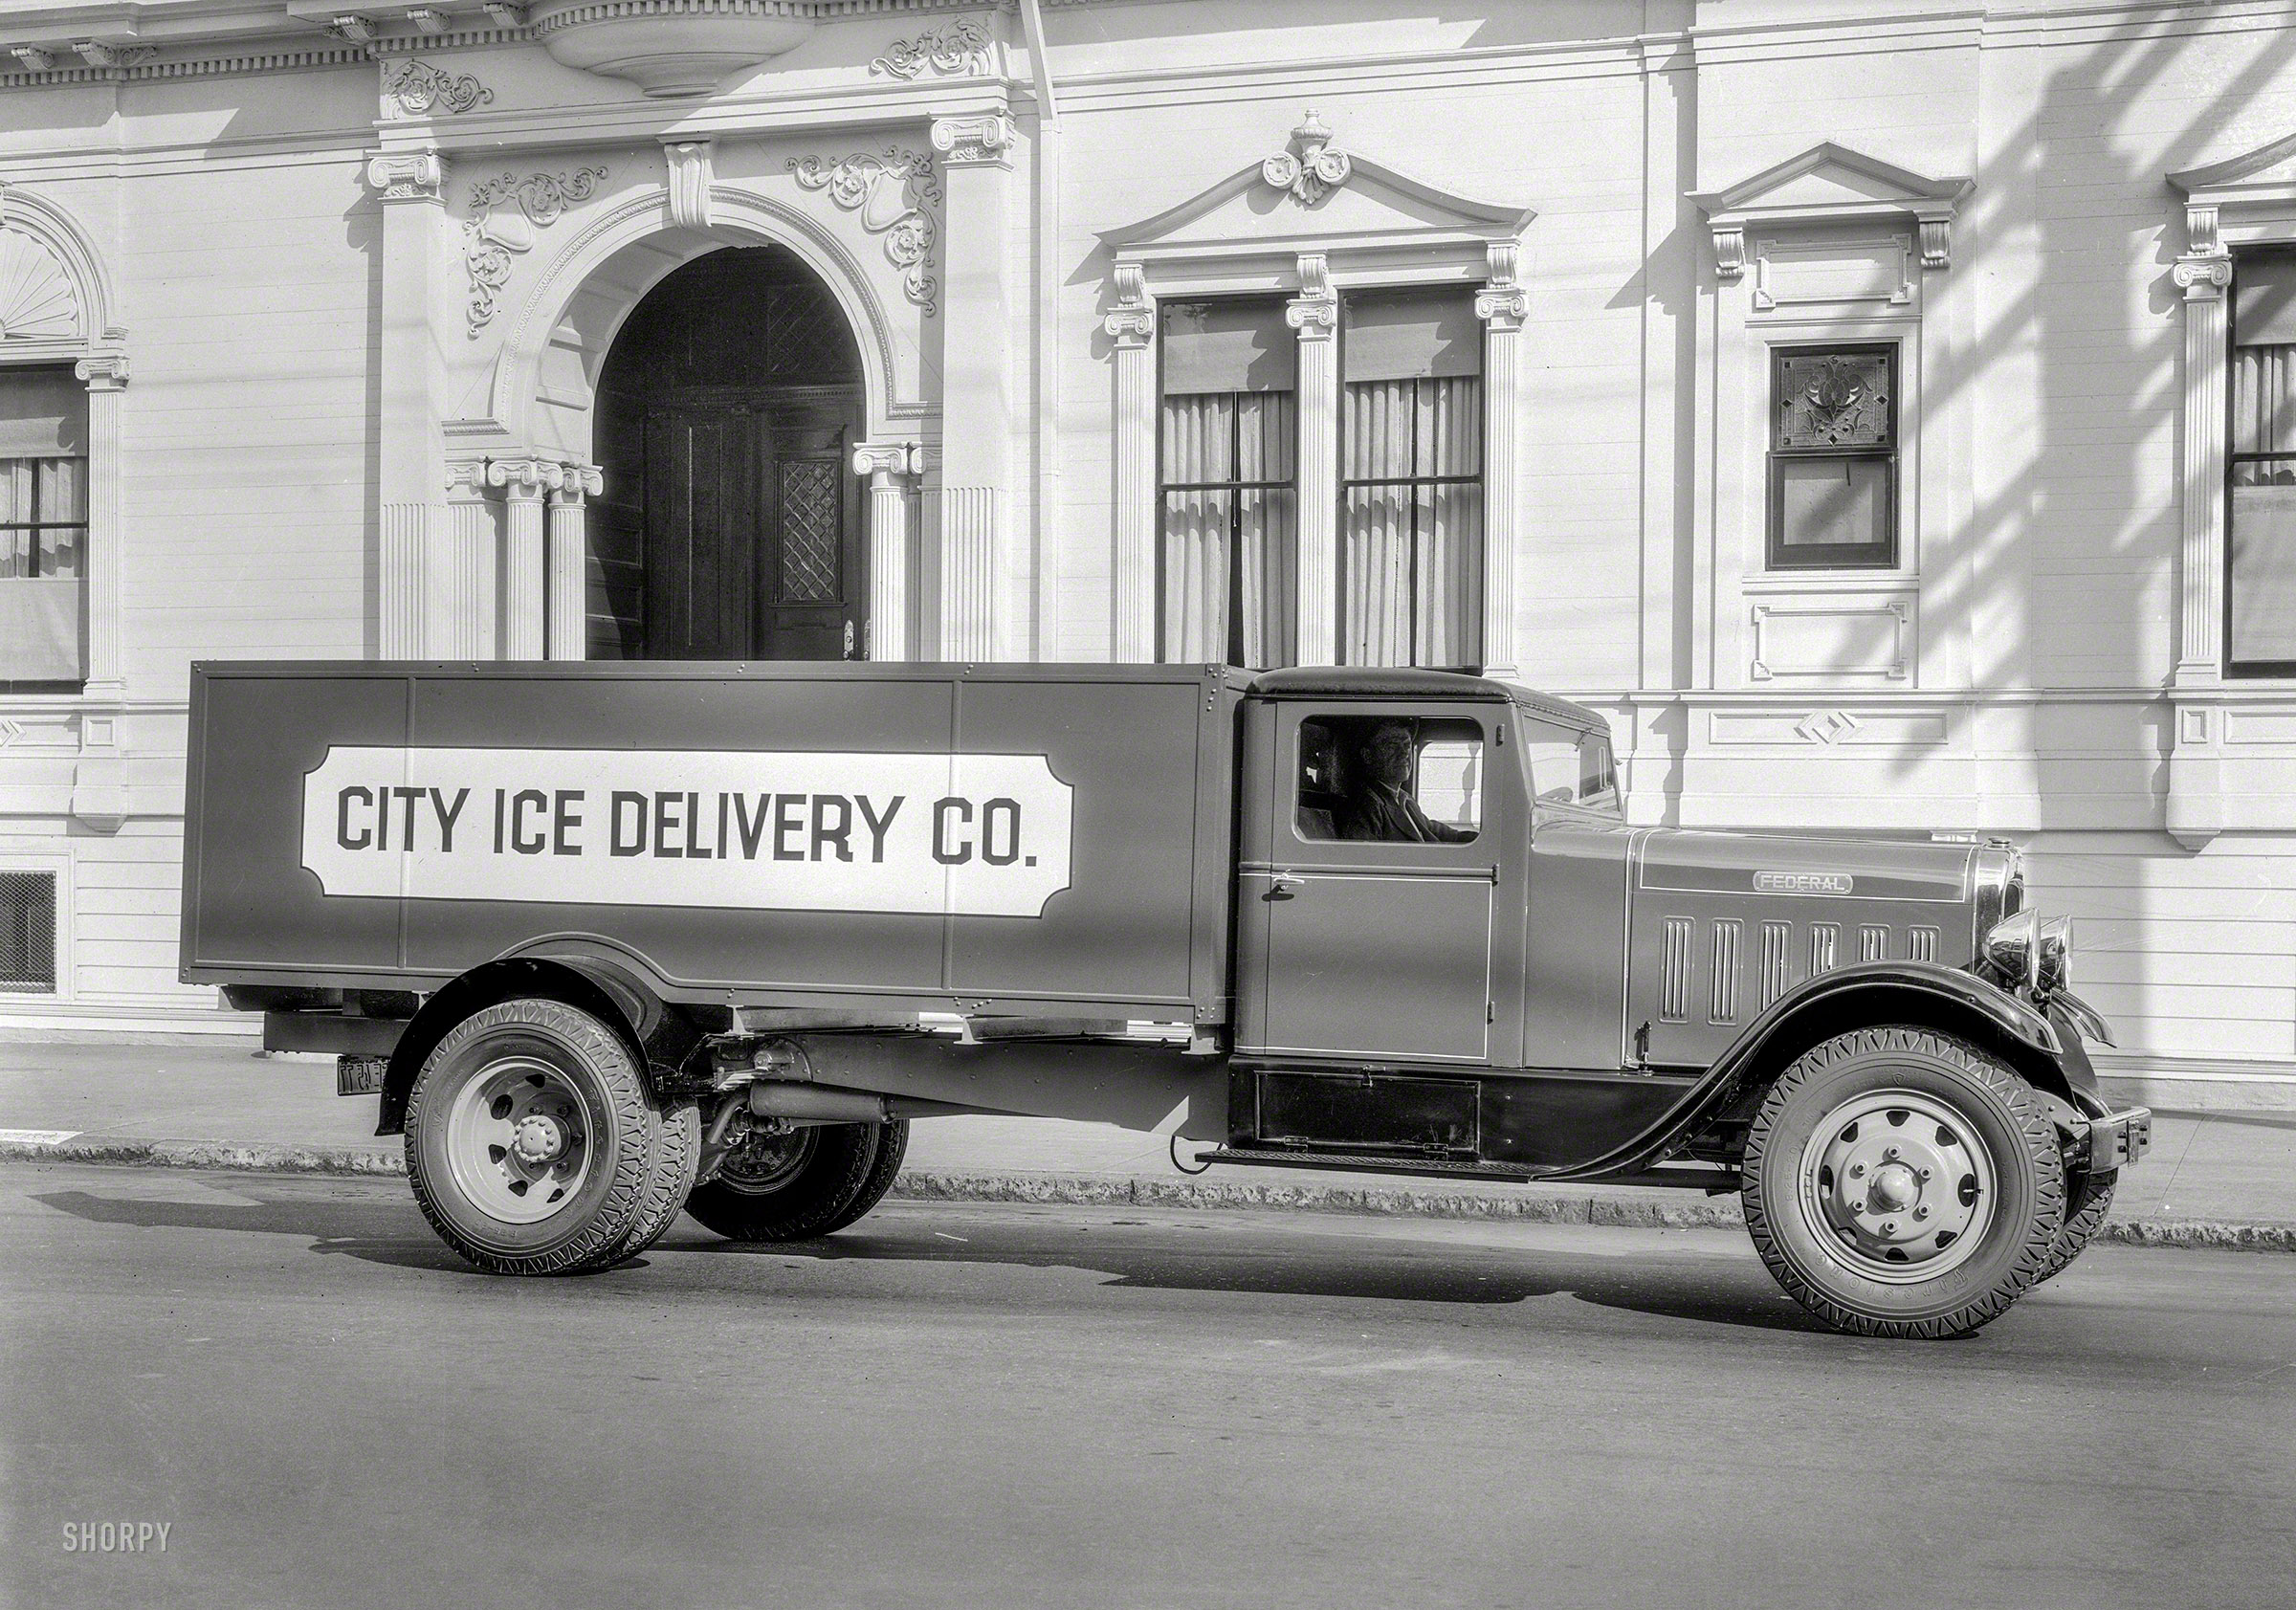 San Francisco. "1934 Federal truck, City Ice Delivery Co." A business that was melting away. 5x7 film negative by Christopher Helin. View full size.